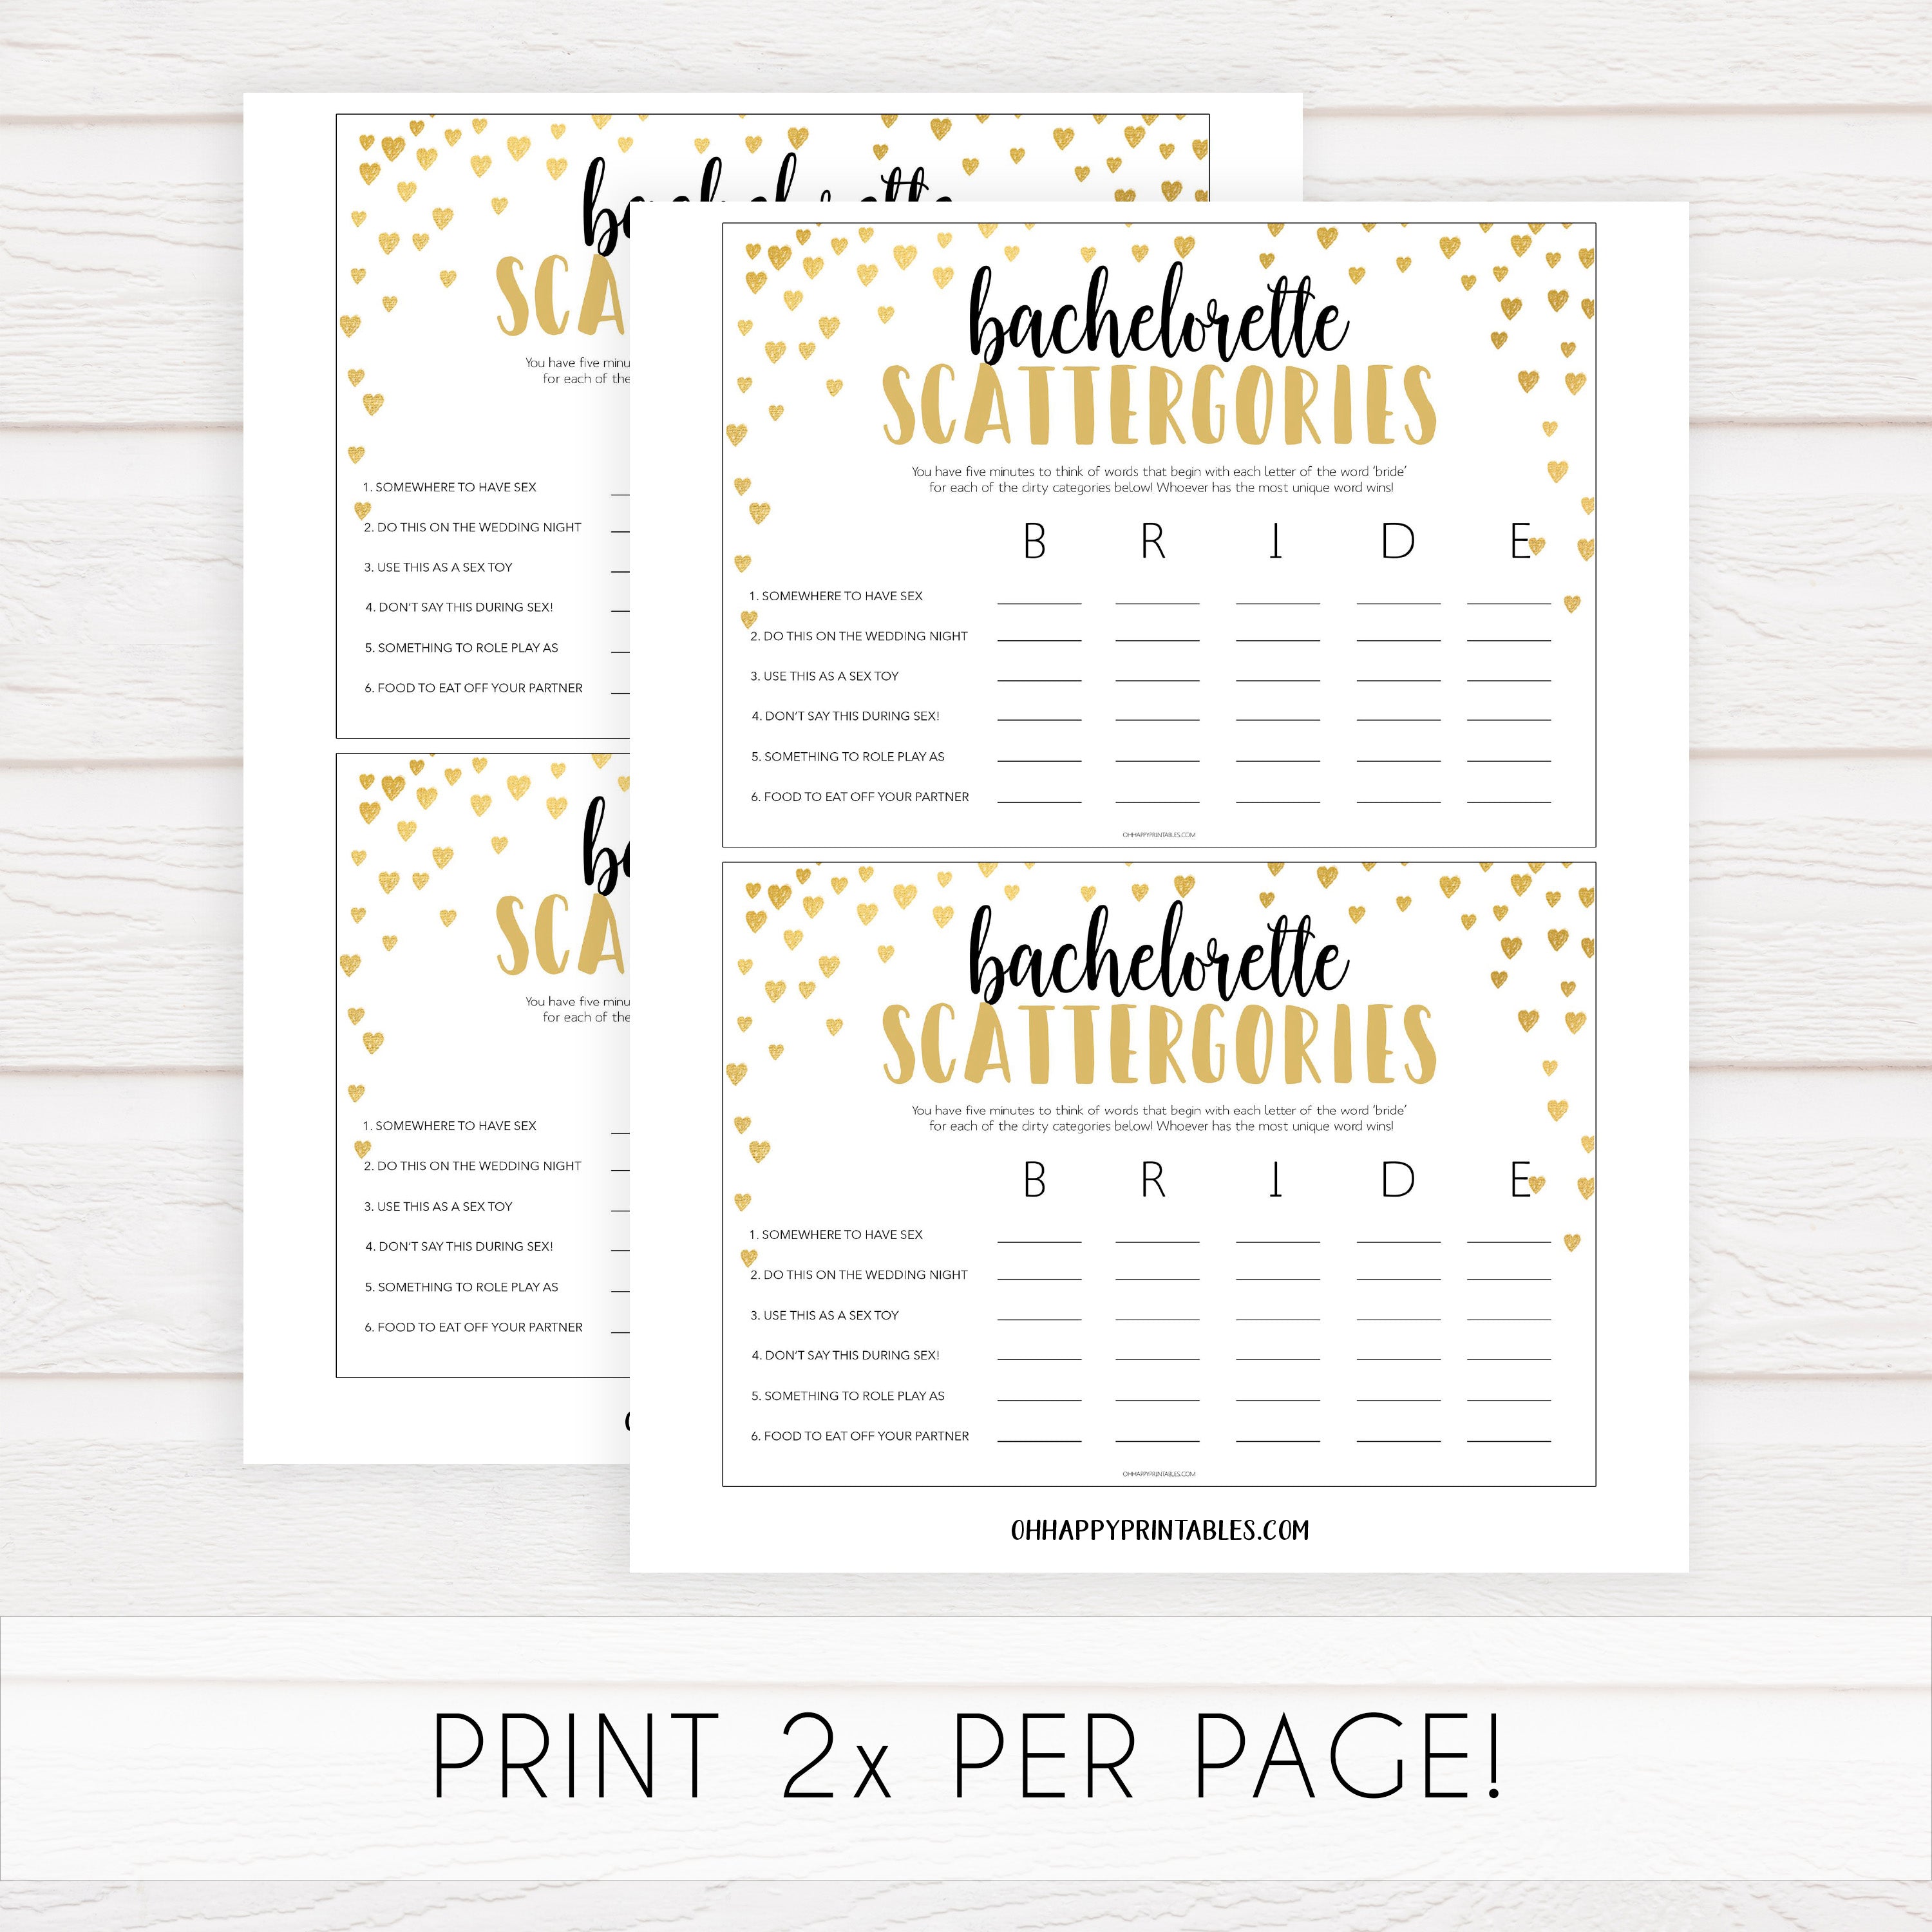 Gold hearts bachelorette games, dirty scattergories game, printable bachelorette games, hen party games, top party games, fun bridal shower games, bachelorette party games